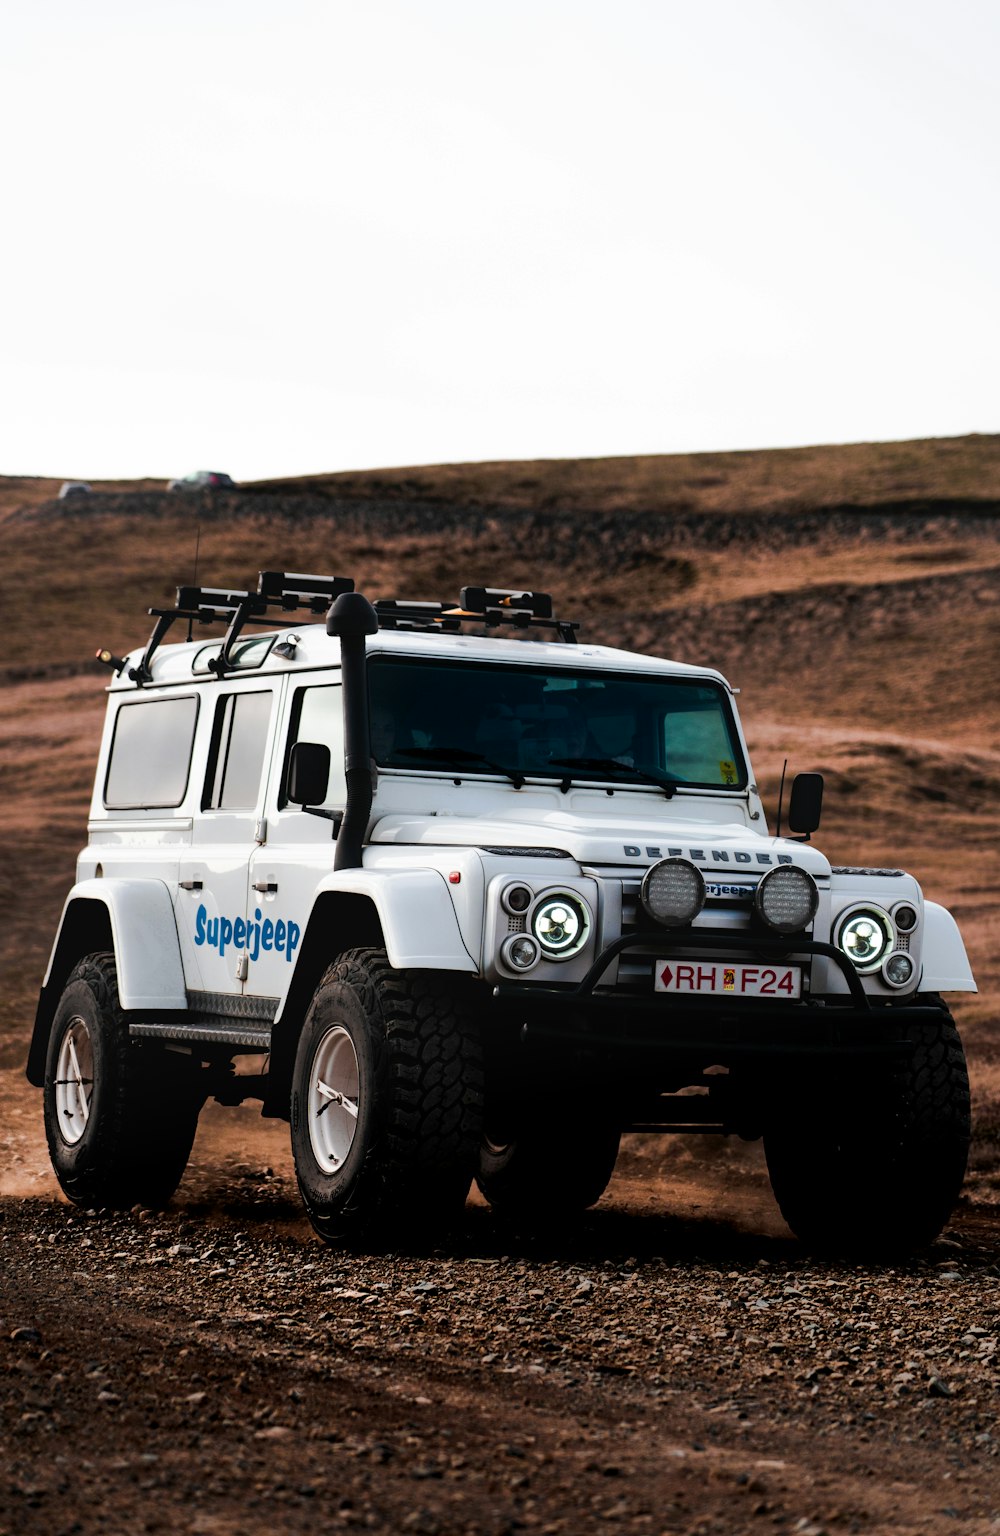 white and black jeep wrangler on dirt road during daytime